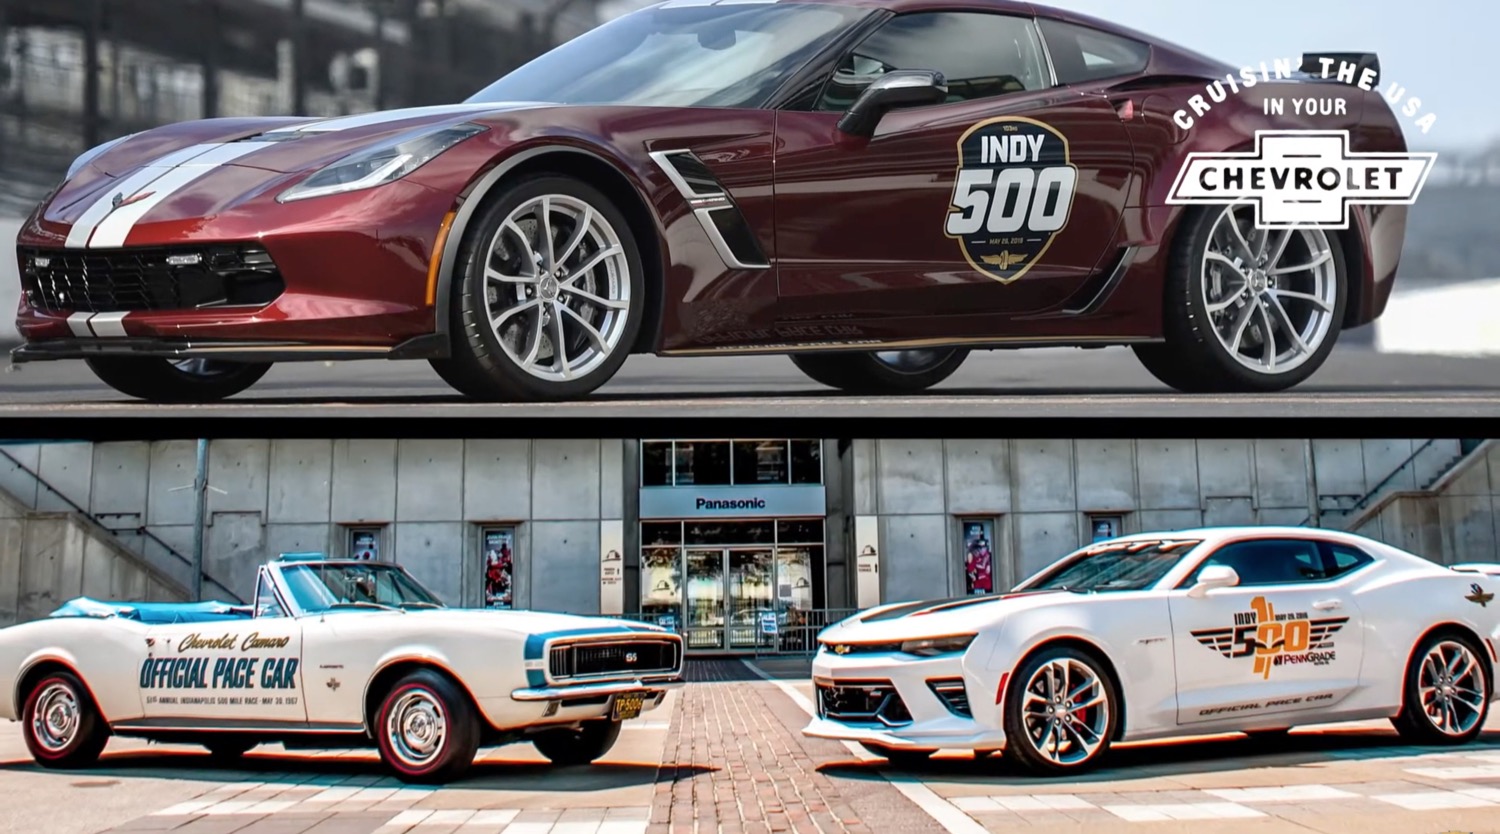 A Walk Around This 11 Chevy Camaro Ss Pace Car Video Gm Authority